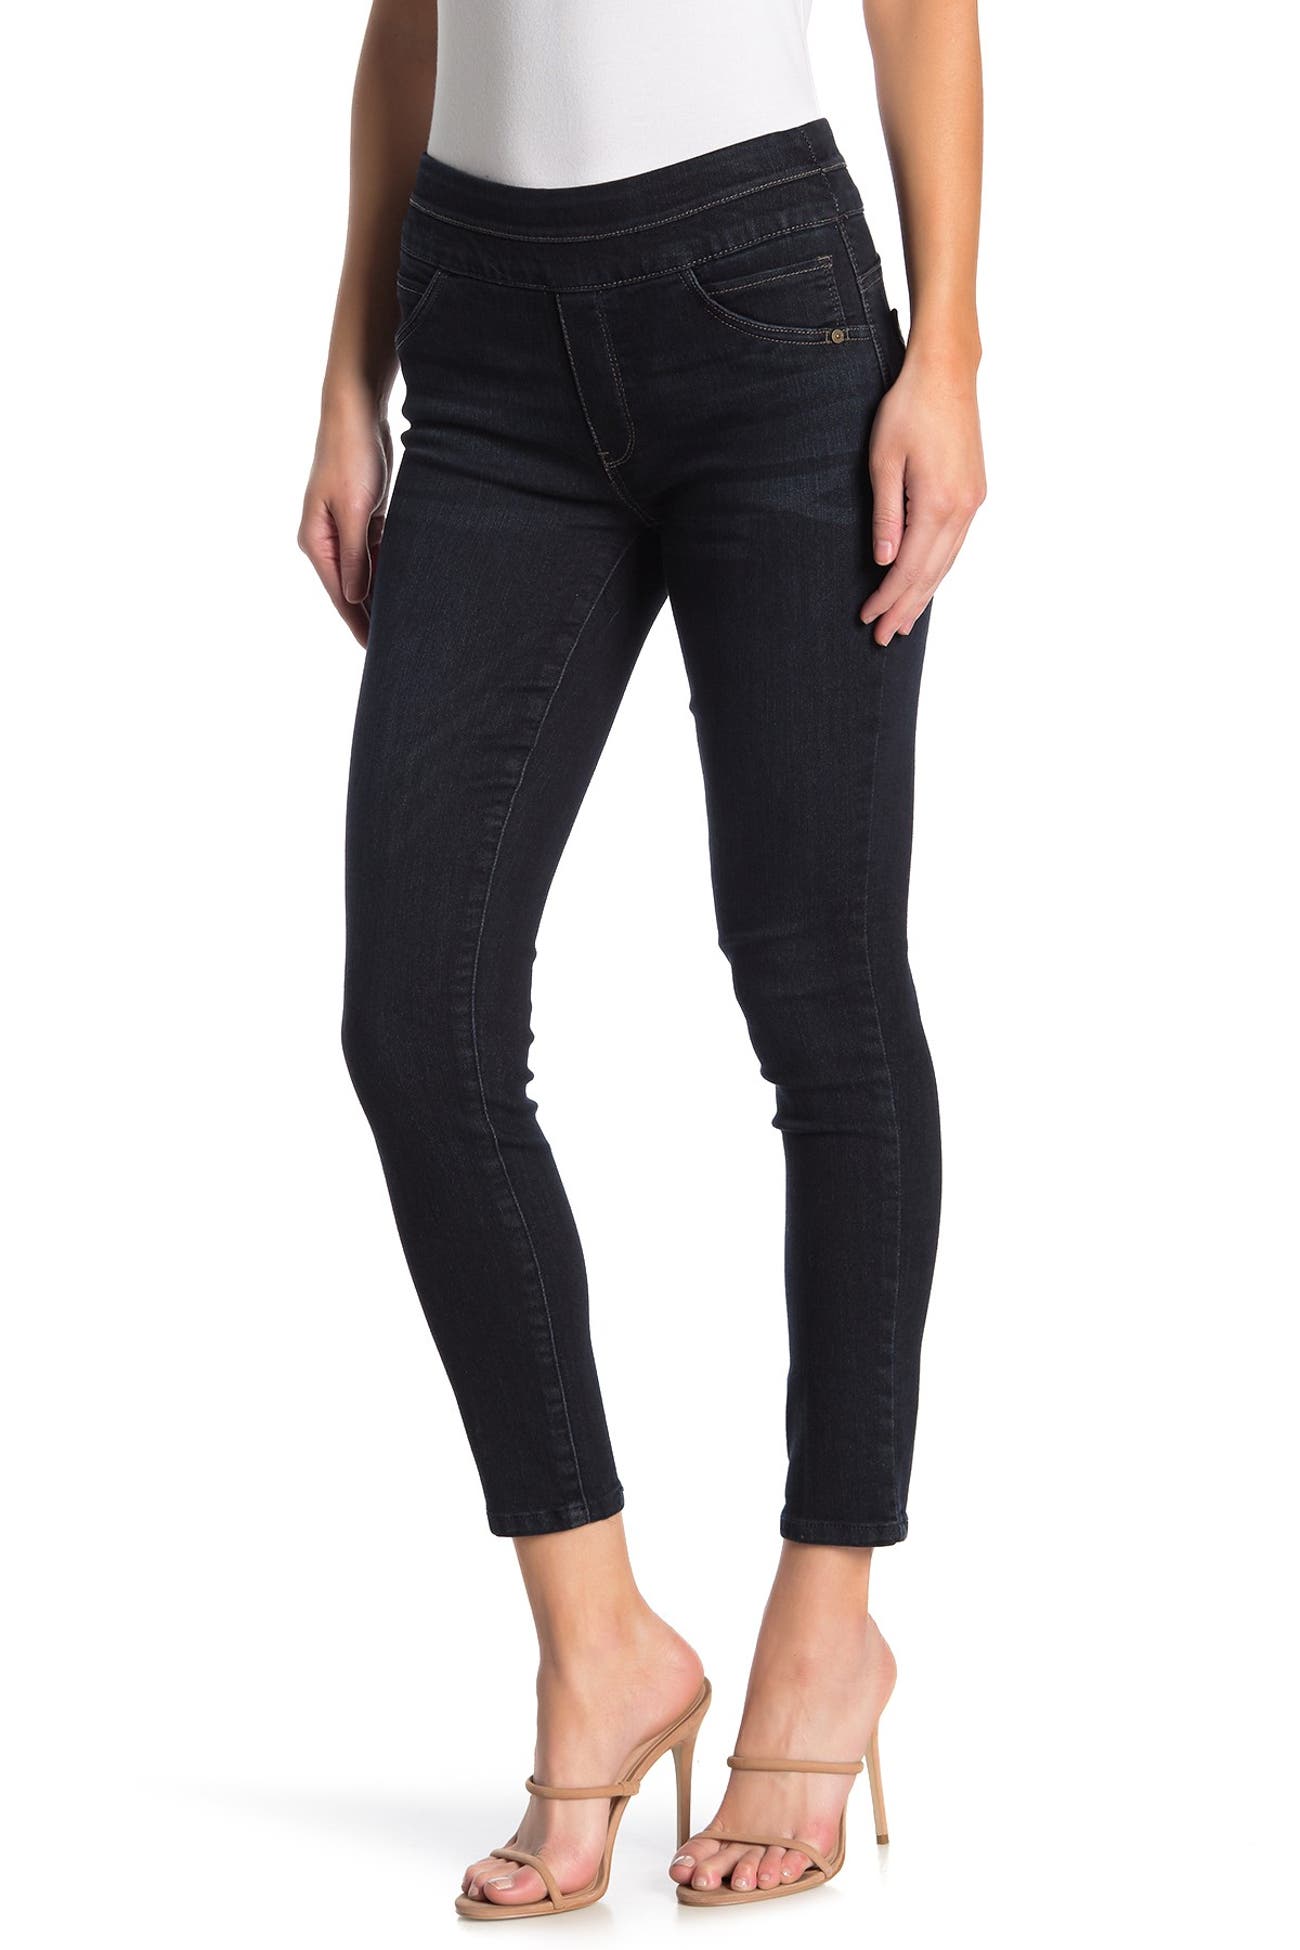 Democracy | Ab Tech High Rise Glide Skinny Jeans | Nordstrom Rack